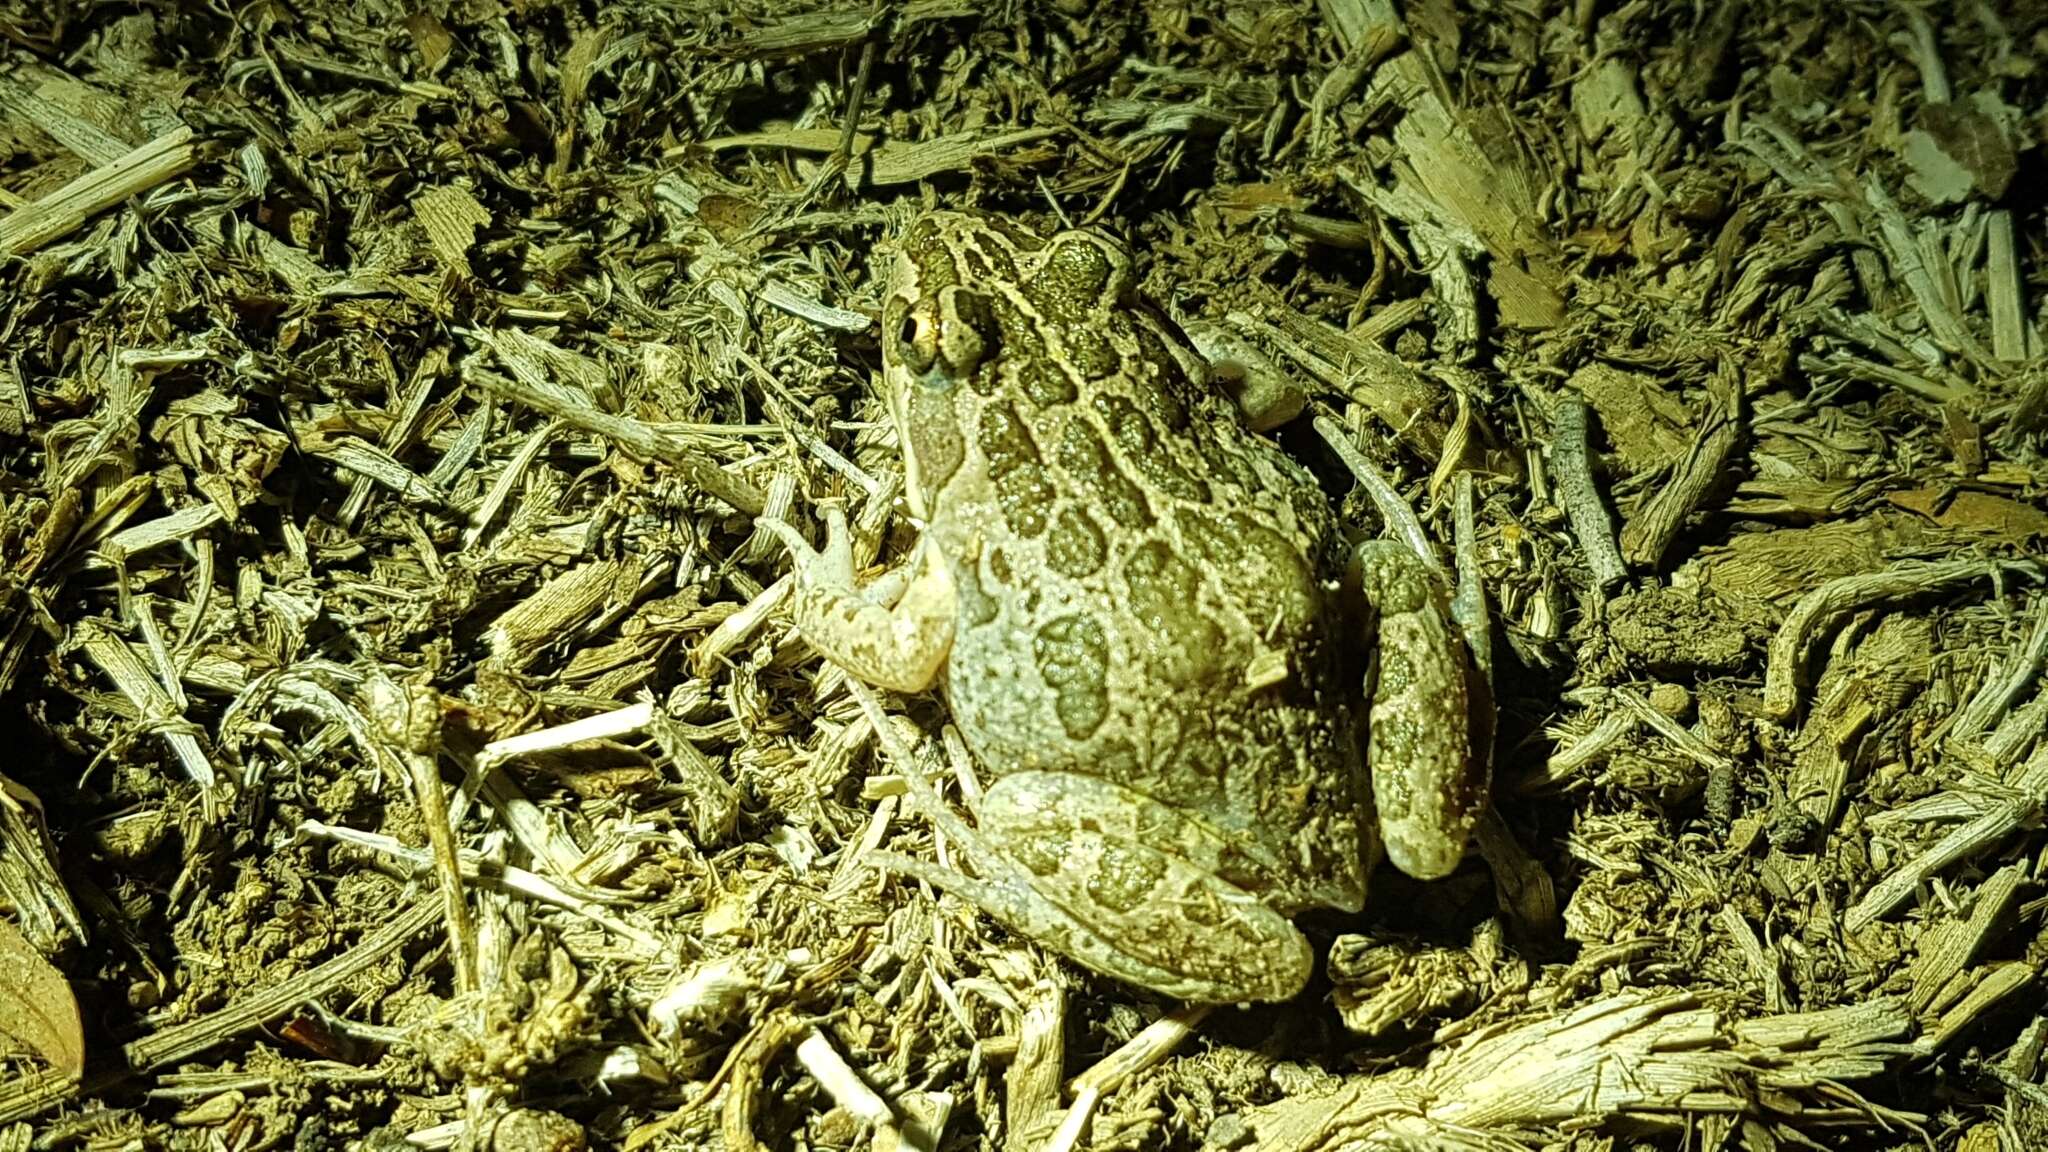 Image of Spotted Grass Frog